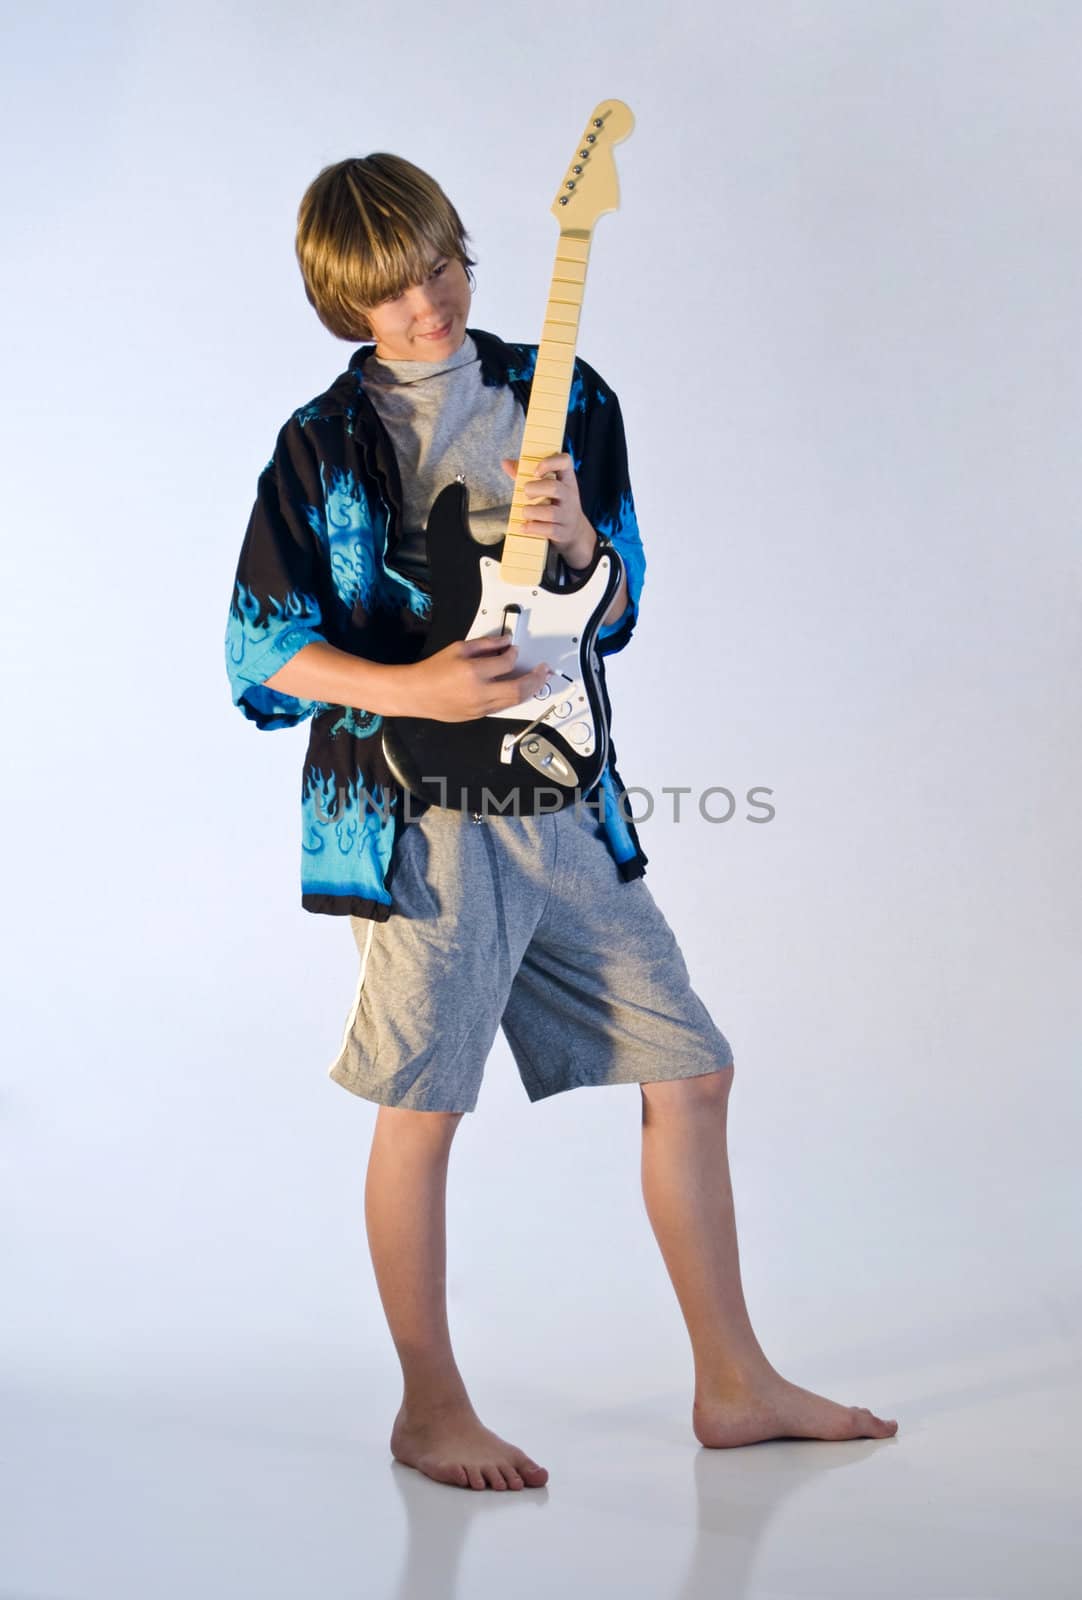 Teenager playing a video game guitar while standing on a reflective surface.